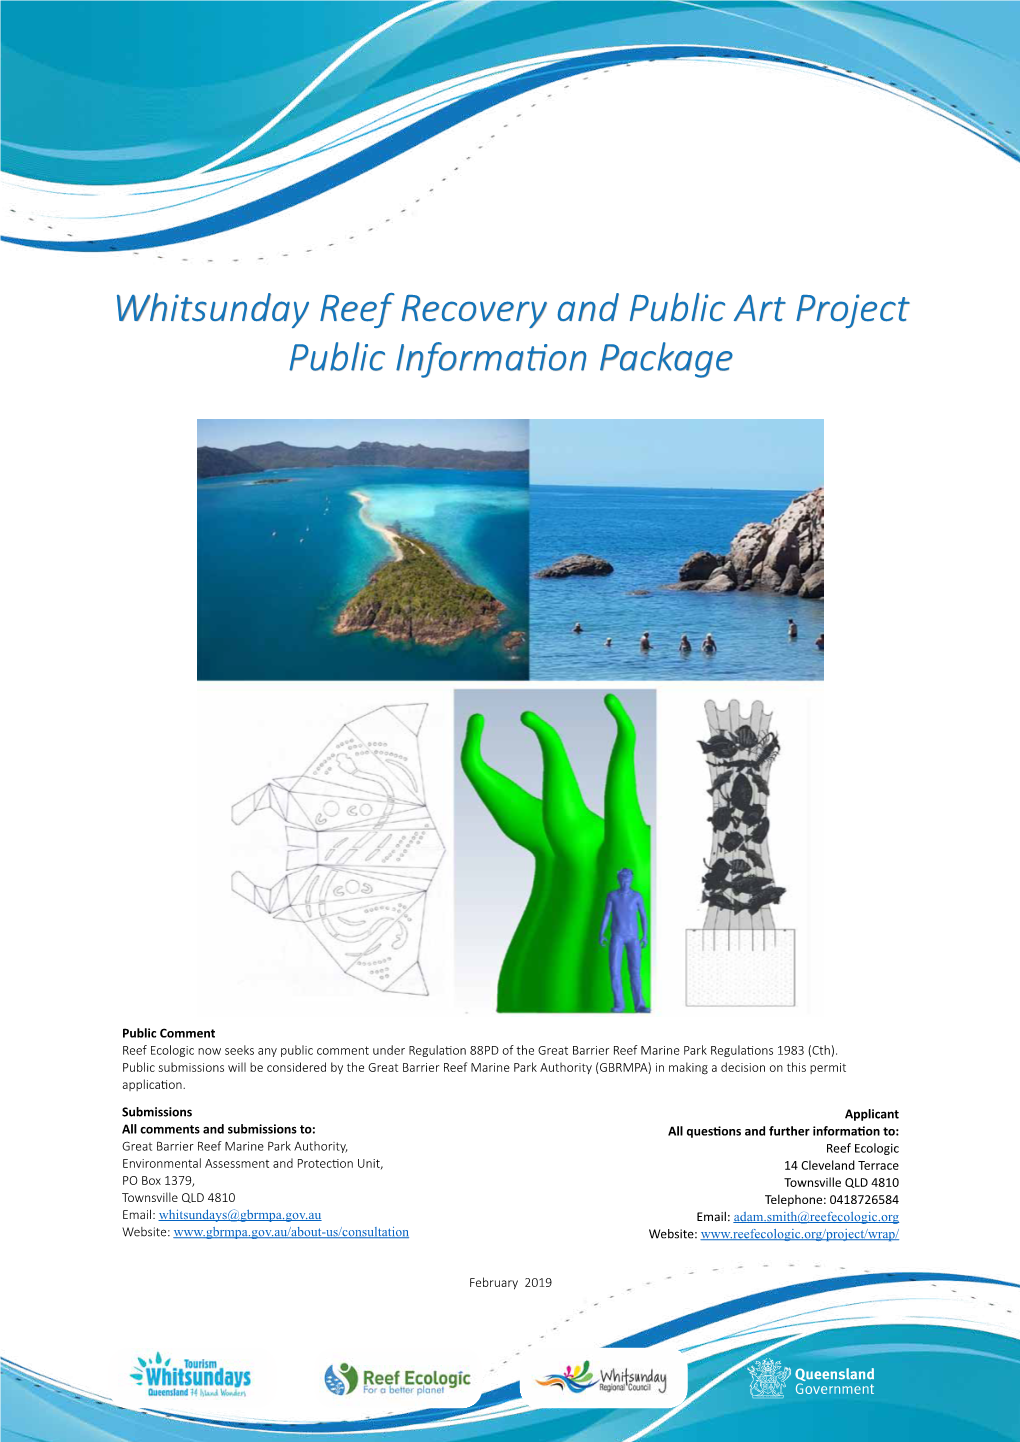 Whitsunday Reef Recovery and Public Art Project Public Information Package